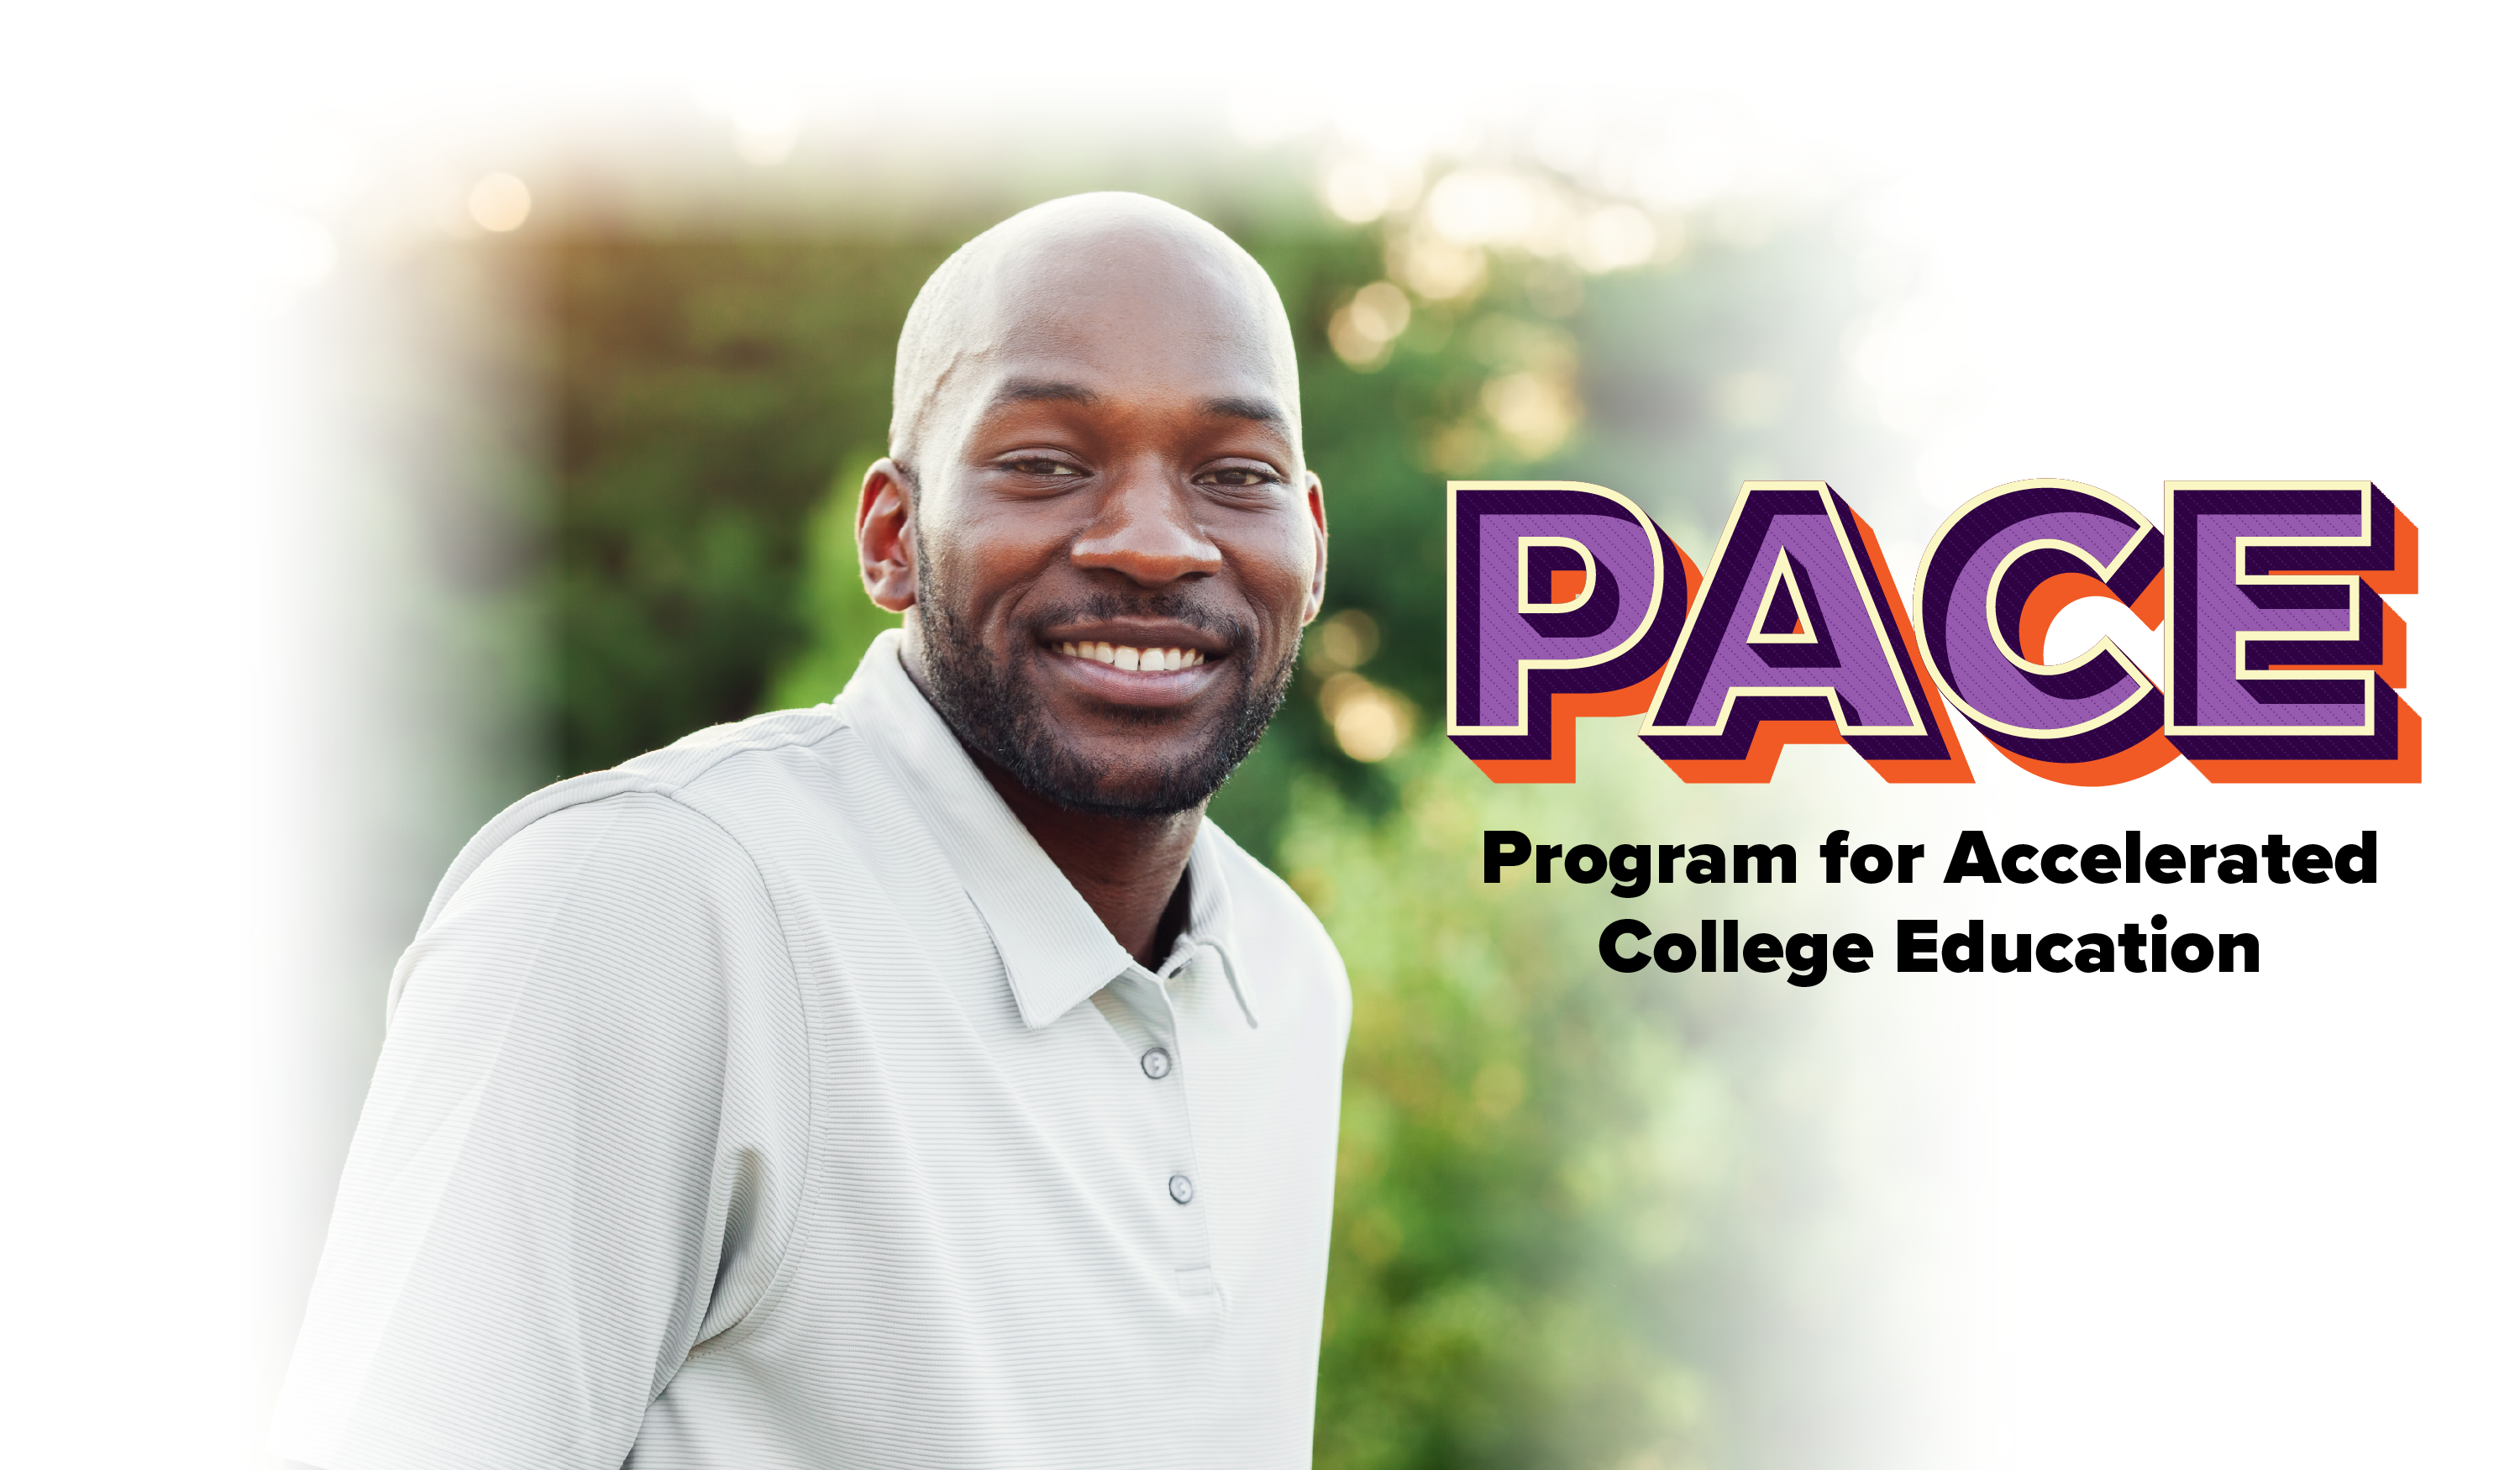 PACE Program for Accelerated College Education